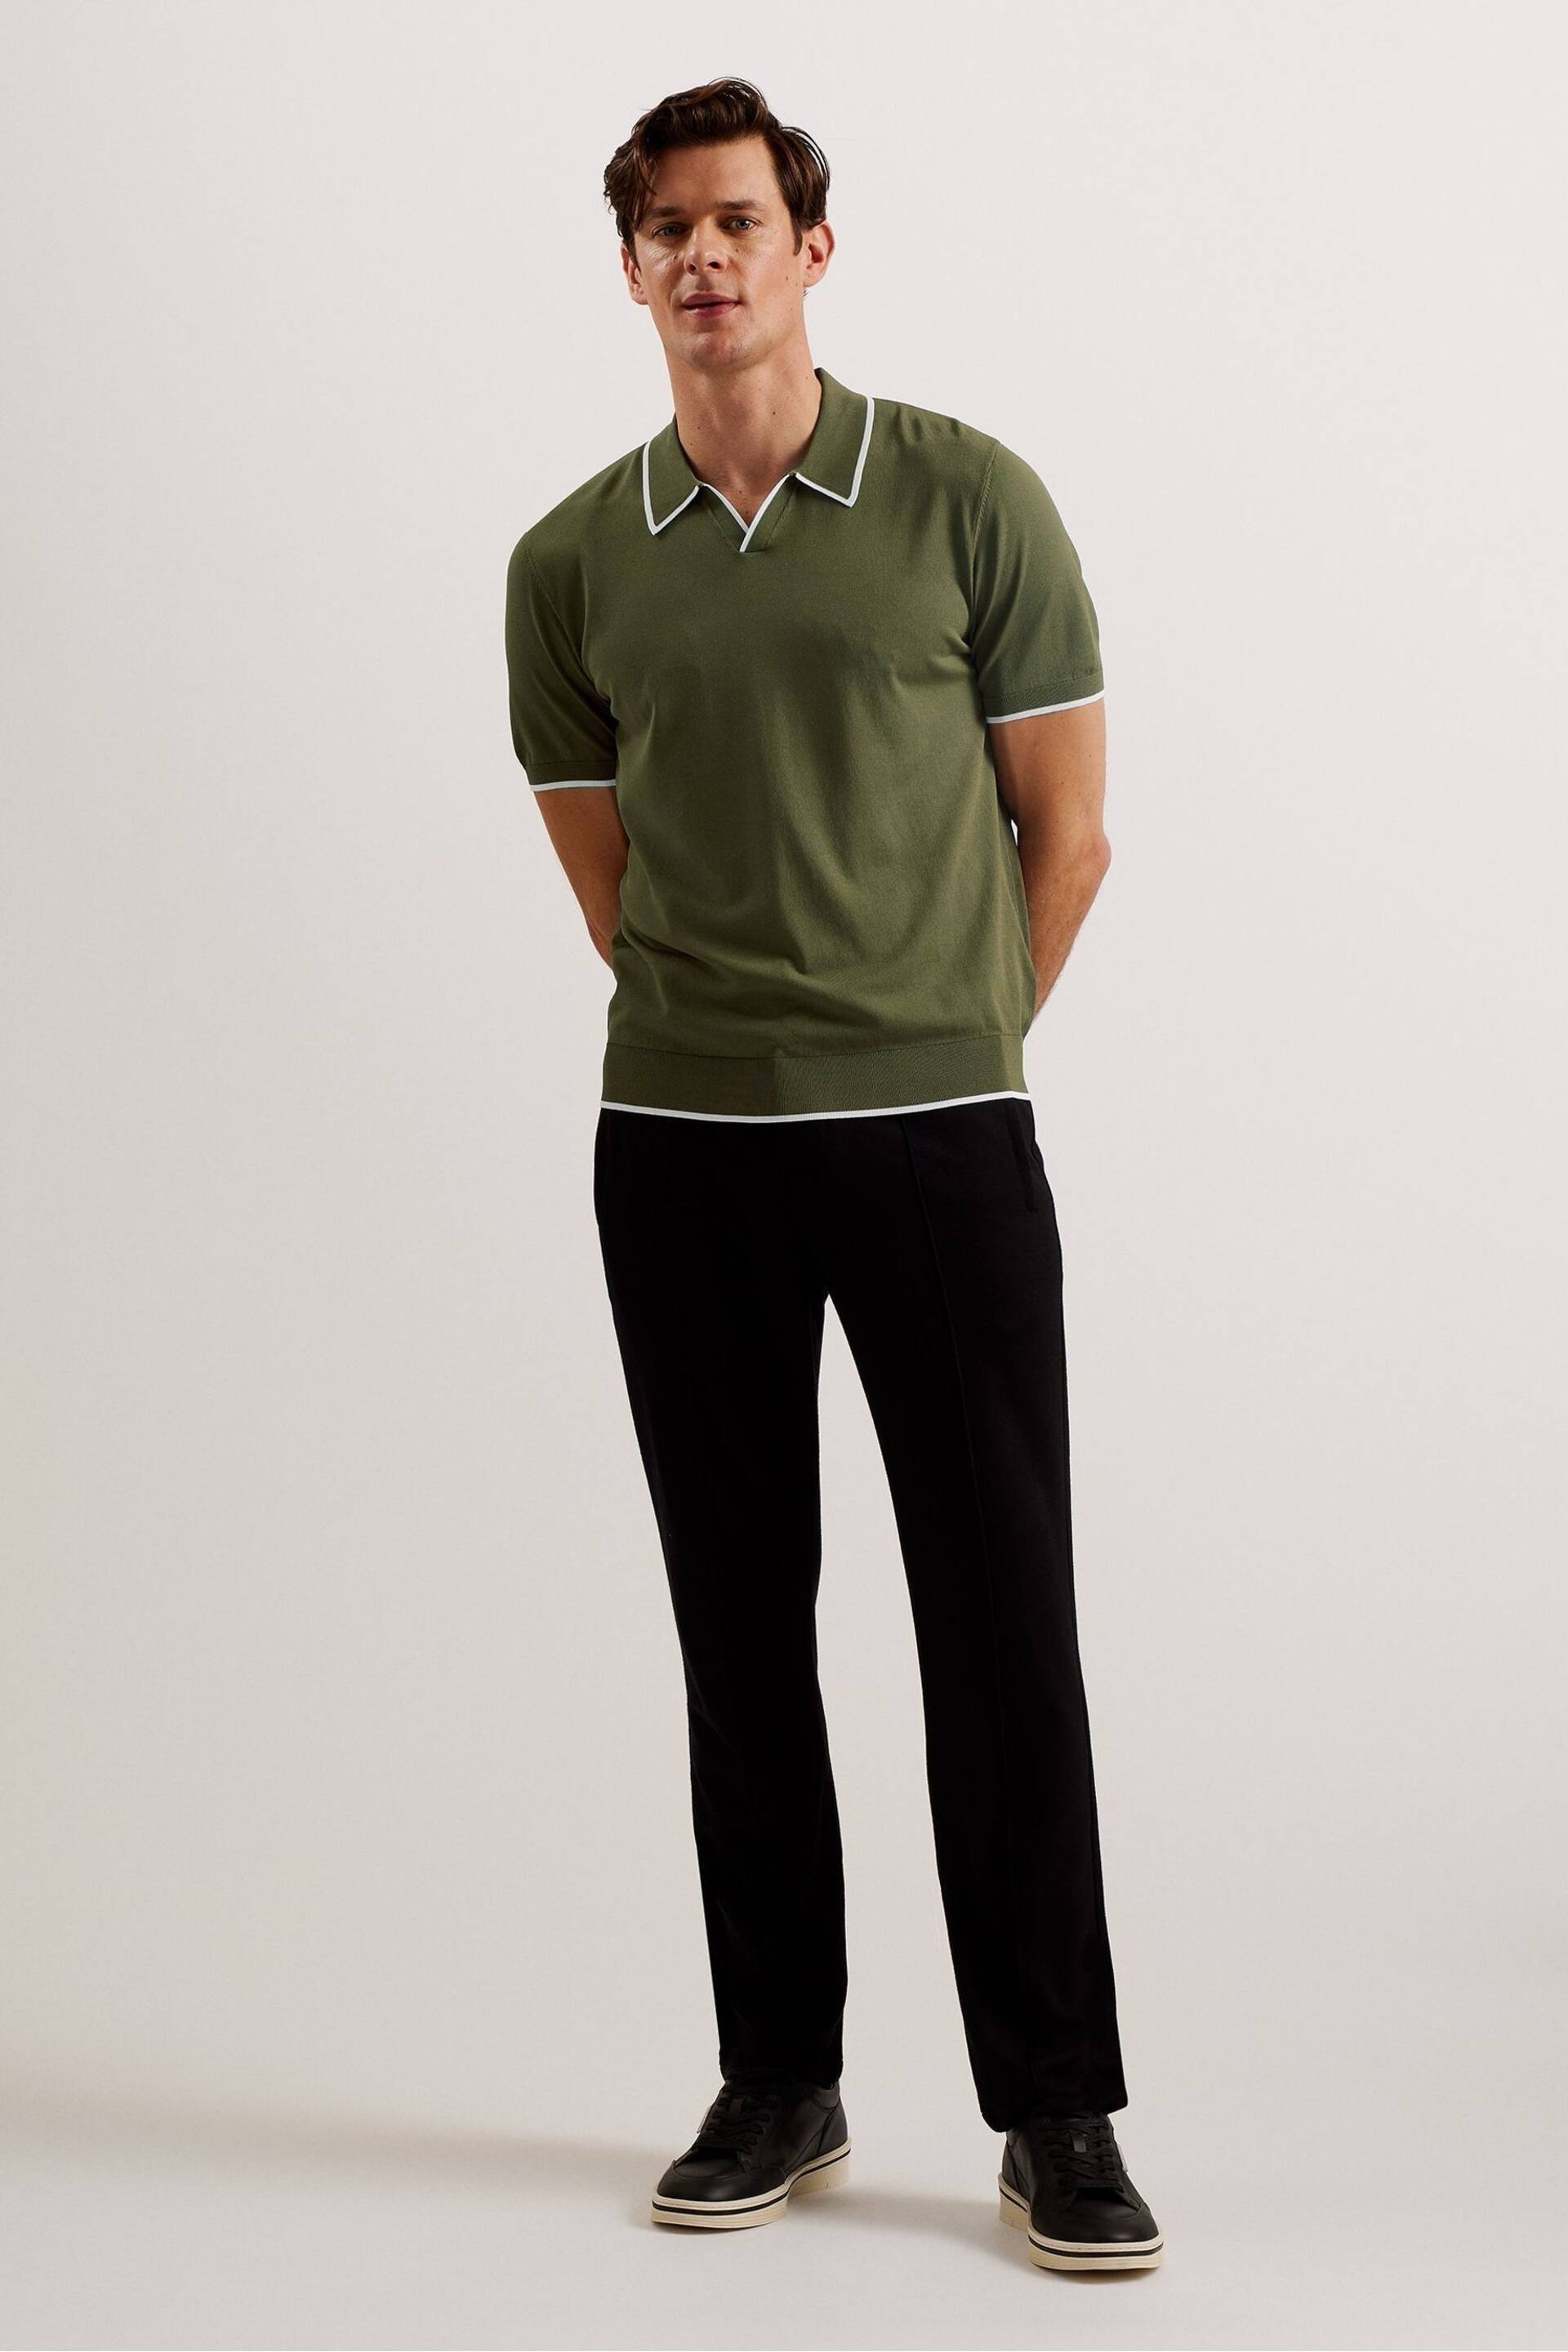 Ted Baker Green Stortfo Short Sleeve Rayon Open Neck Polo Shirt - Image 1 of 6